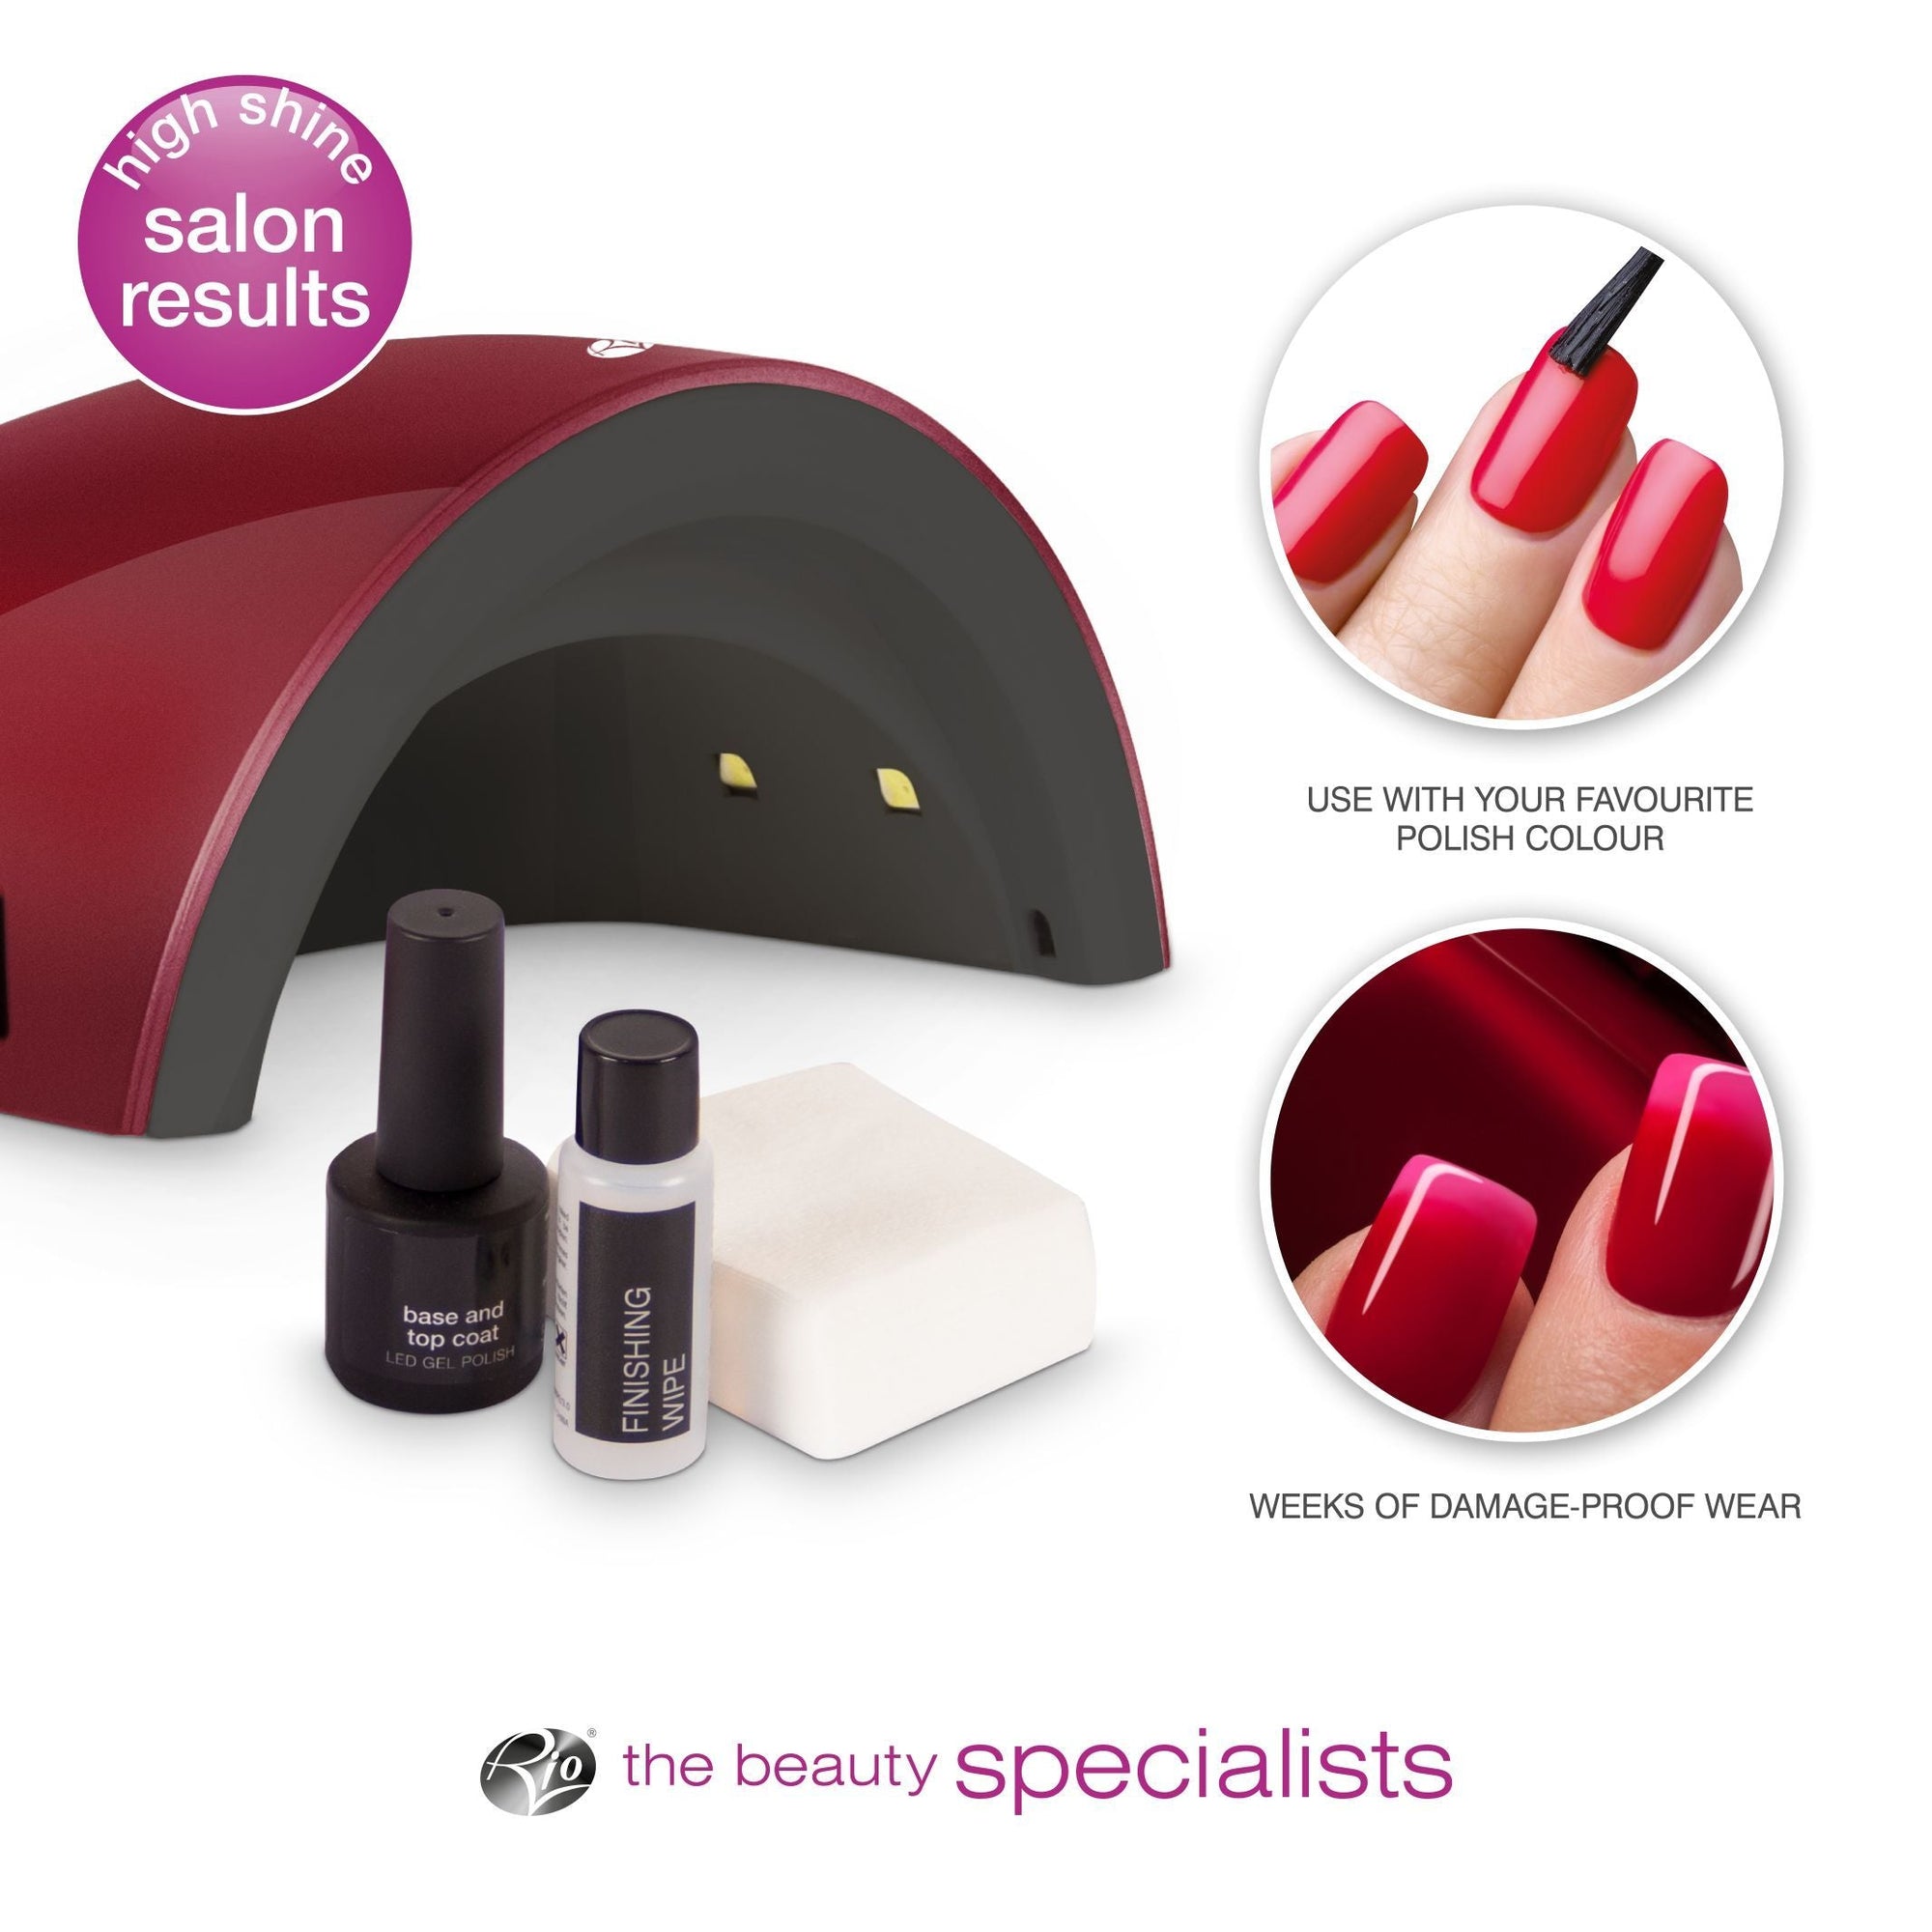 Rio 14 day gel nails kit captioned high shine results with hotspot images of gel manicured nails captioned use with your favourite polish colour and weeks of damage-proof wear